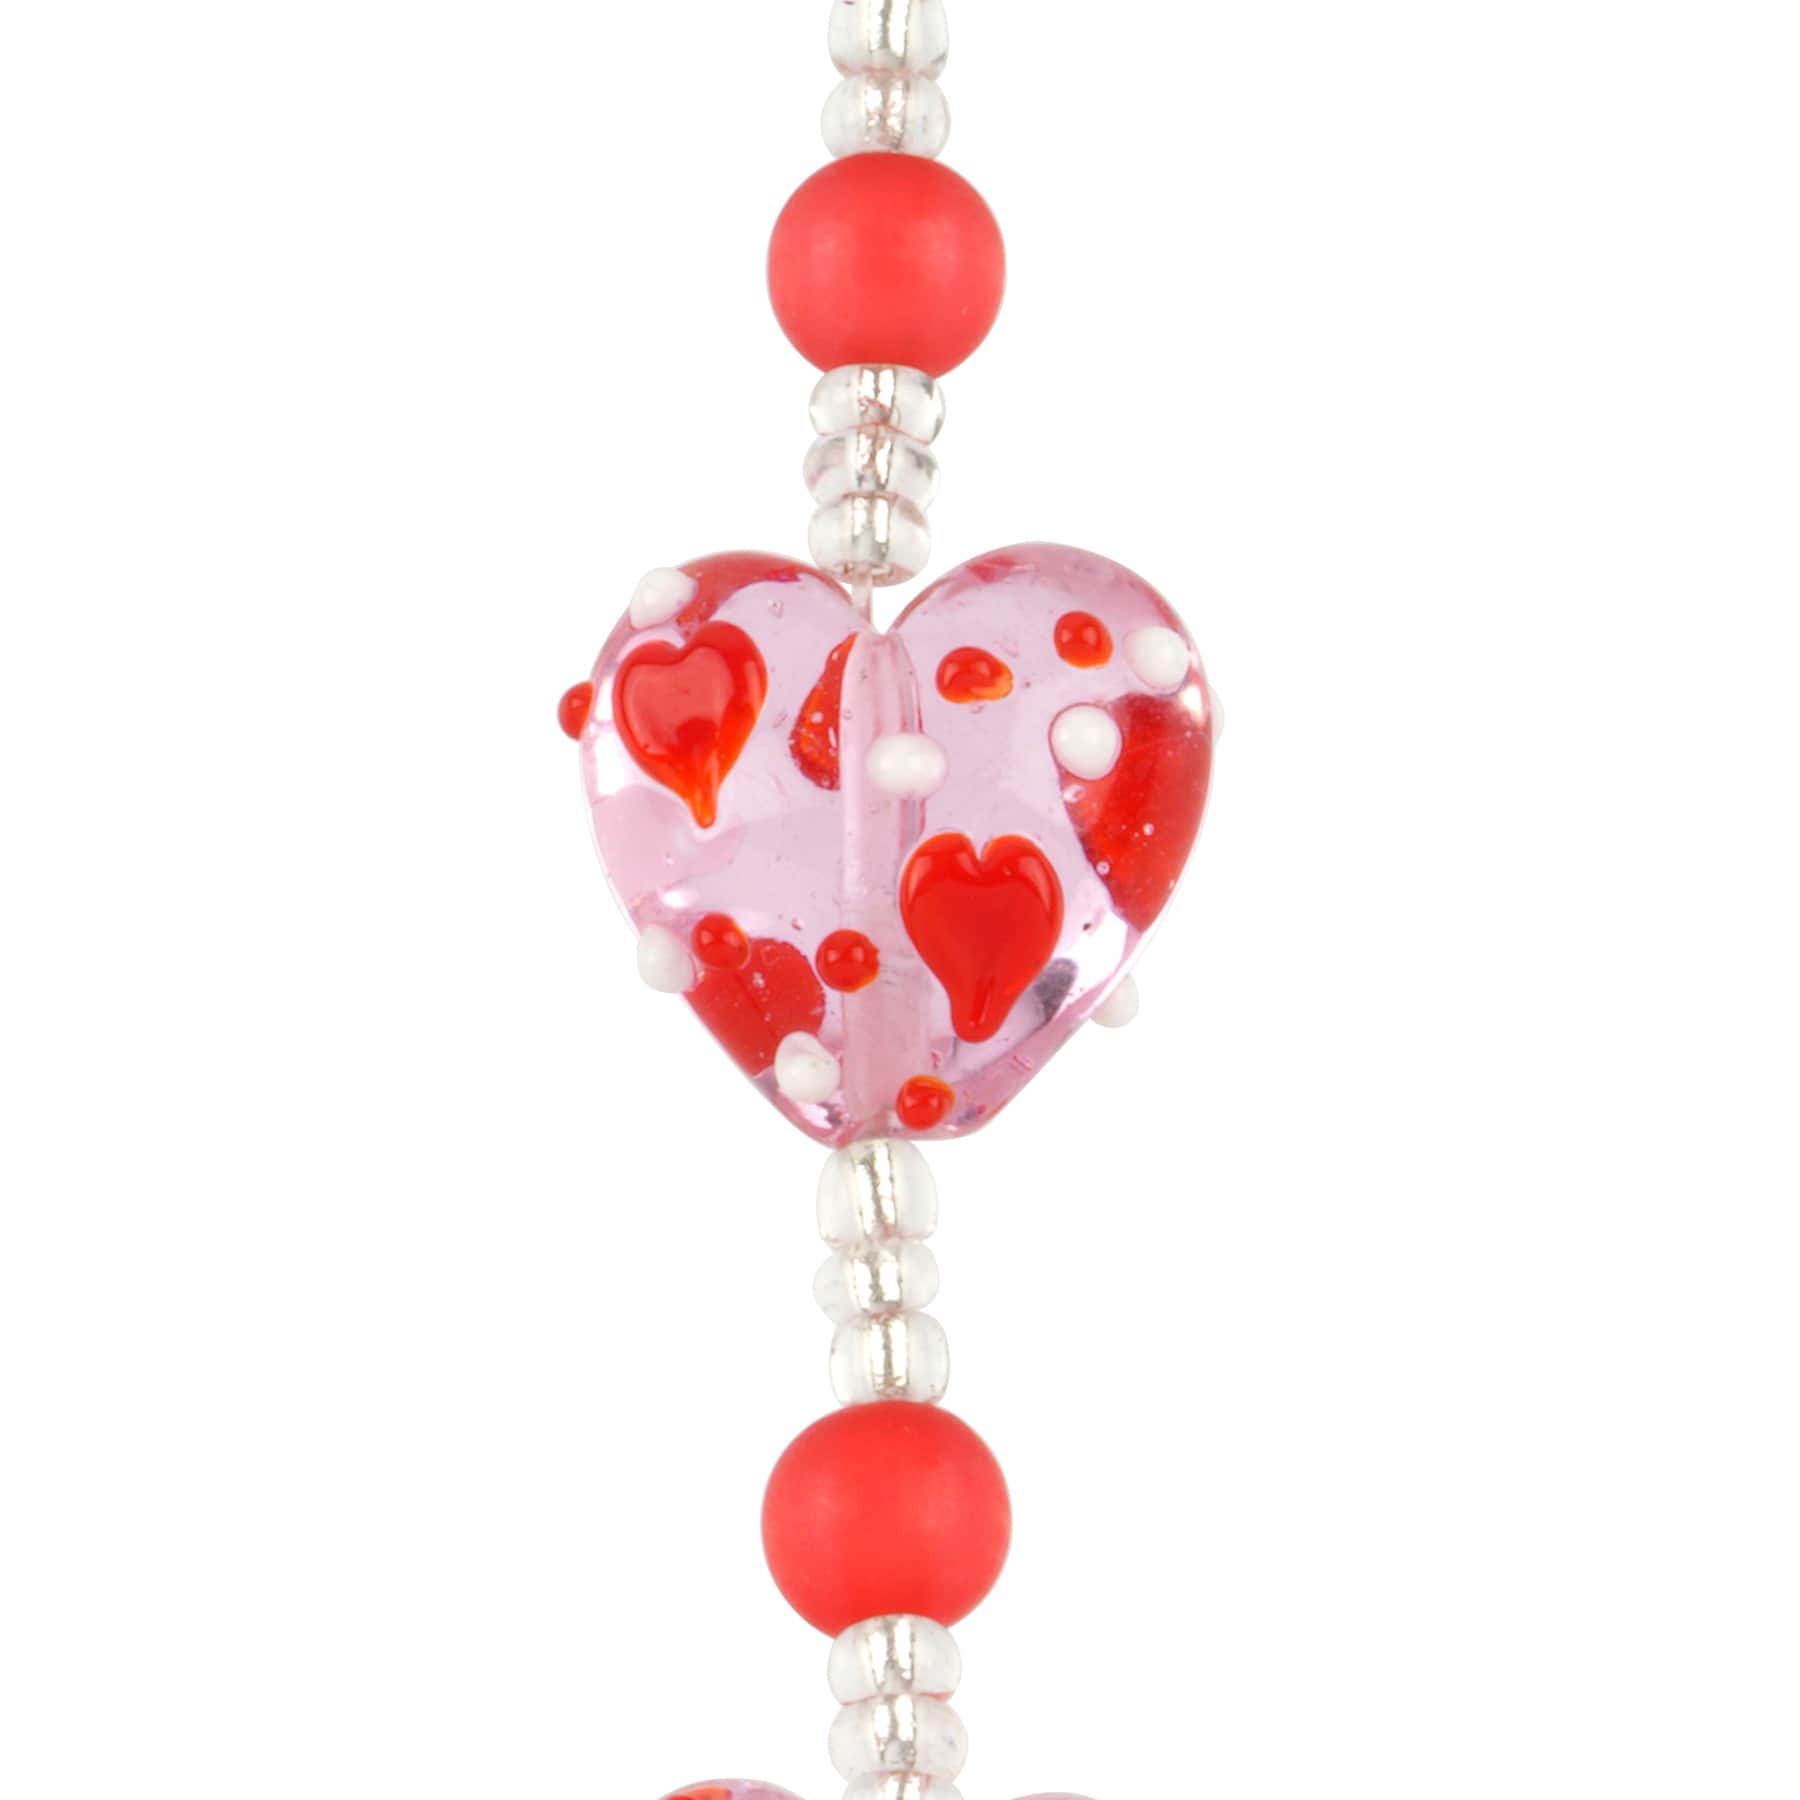 Red Heart Beads Handmade Glass Beads Lampwork Lentil White Red Beads for  Jewelry Making 4pc 